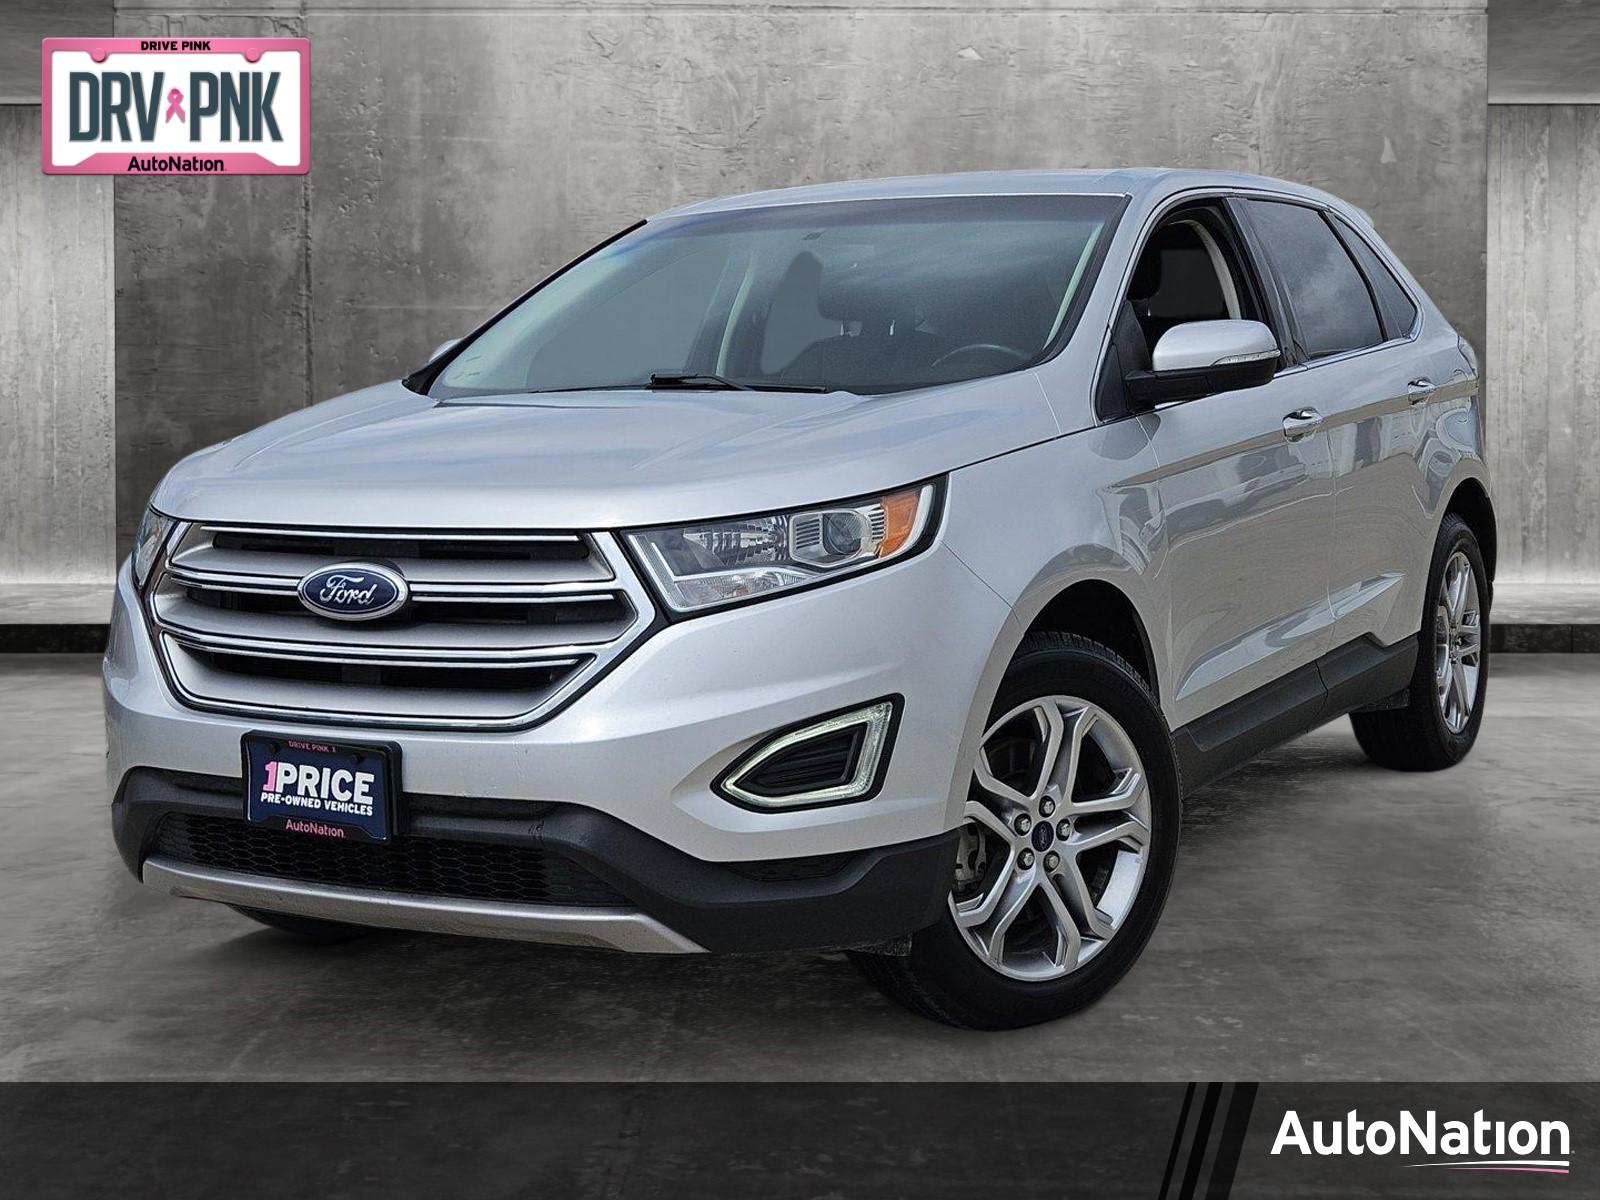 2016 Ford Edge Vehicle Photo in NORTH RICHLAND HILLS, TX 76180-7199